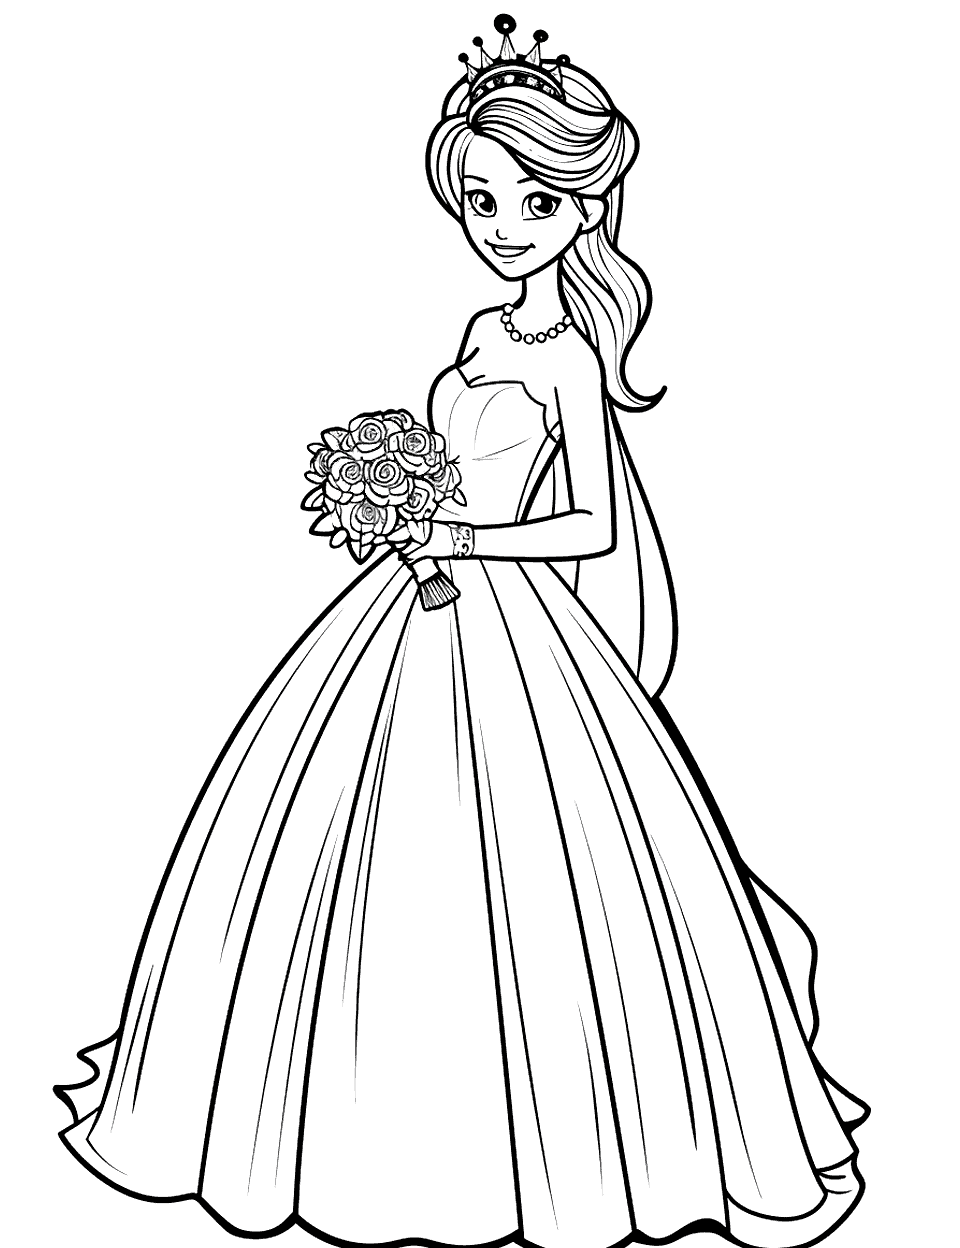 Princess-Themed Bride Wedding Coloring Page - A bride dressed as a princess, complete with a tiara and a magical gown.